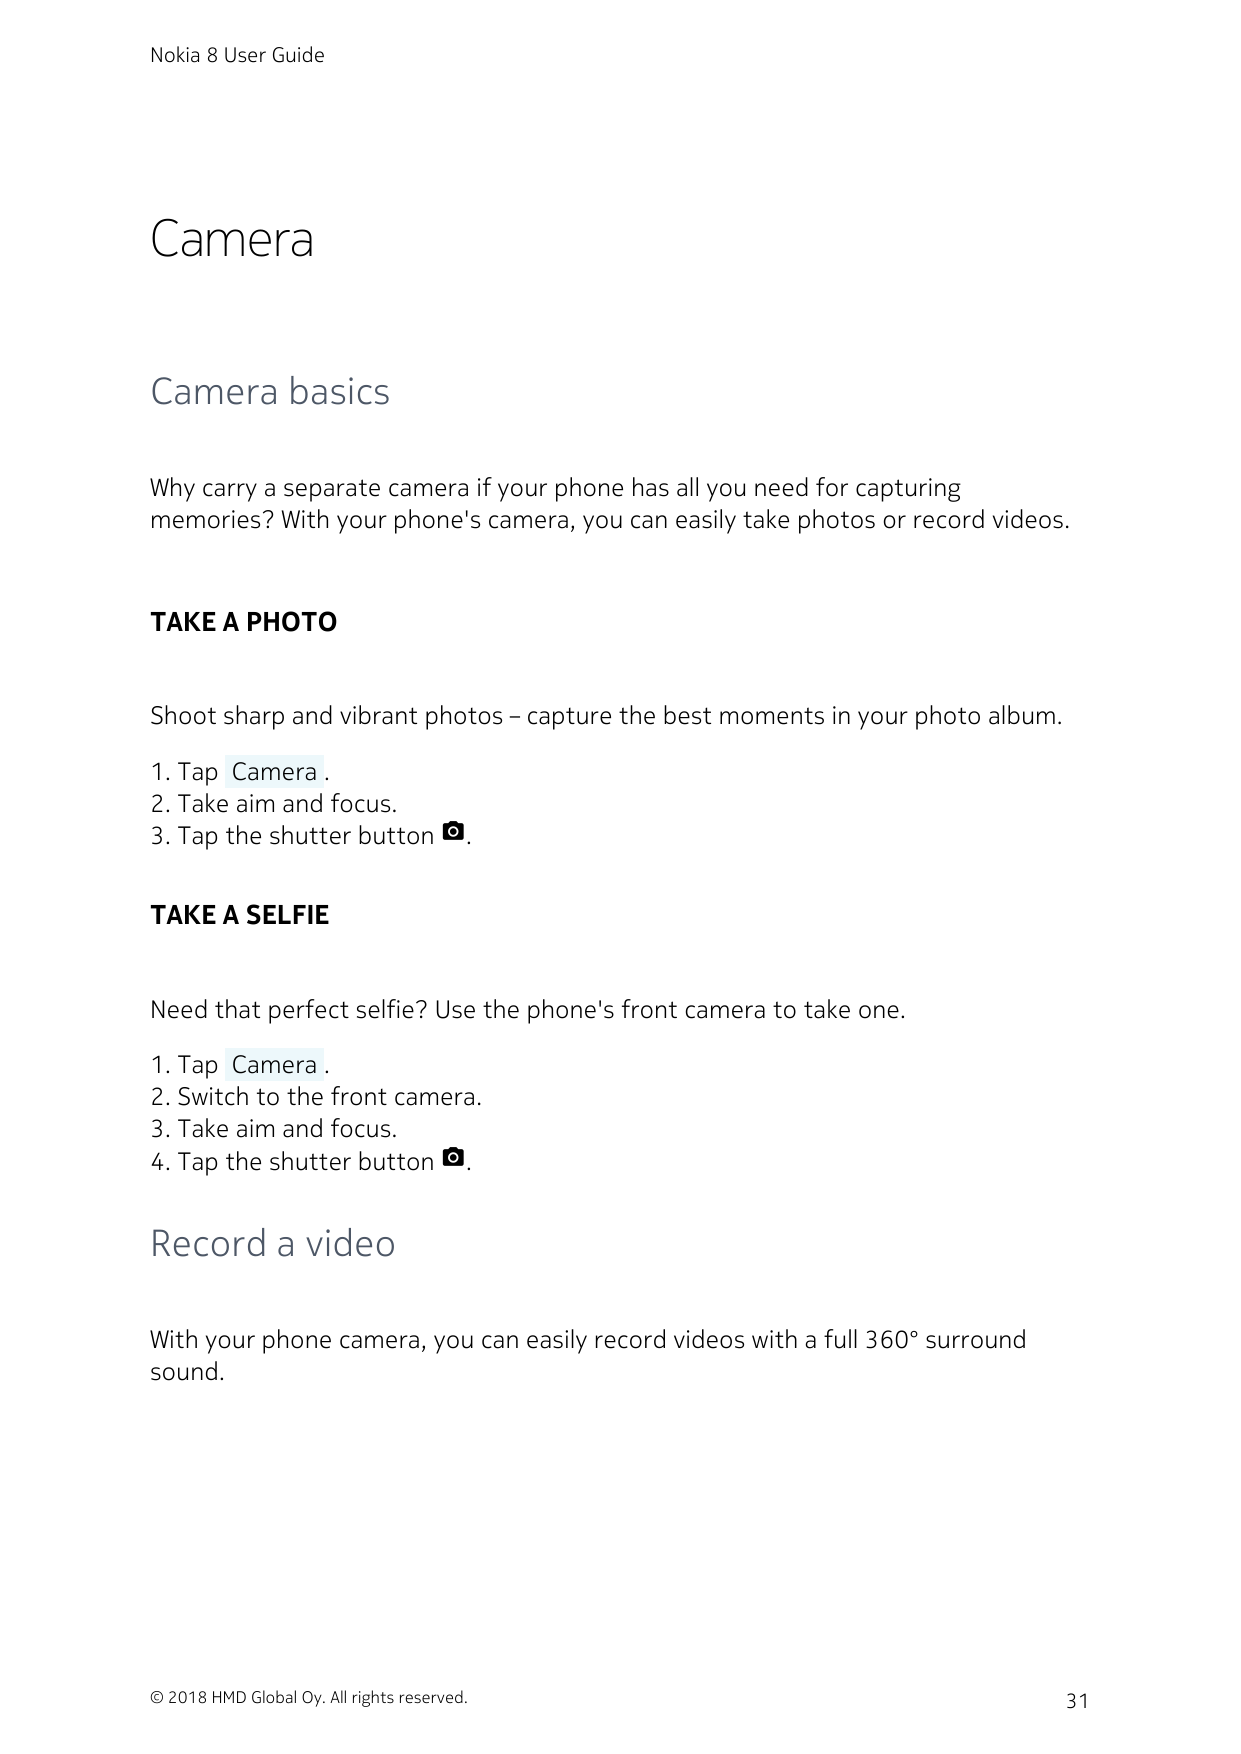 Nokia 8 User GuideCameraCamera basicsWhy carry a separate camera if your phone has all you need for capturingmemories? With your